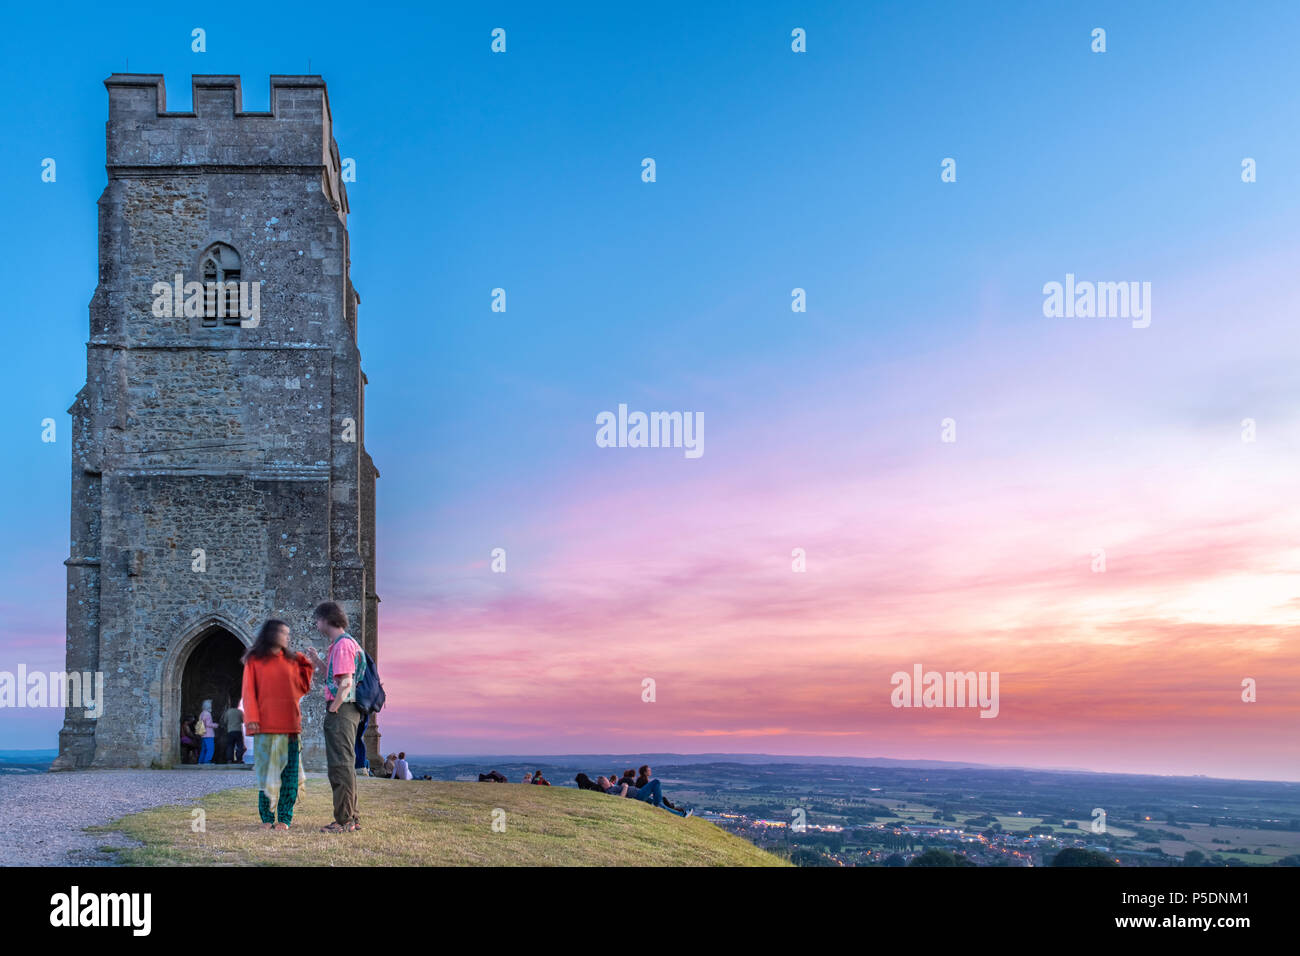 UK Weather - On top of Glastonbury Tor, a group of people gather to witness a beautiful  sunset over the Somerset Levels, as the West of England is se Stock Photo